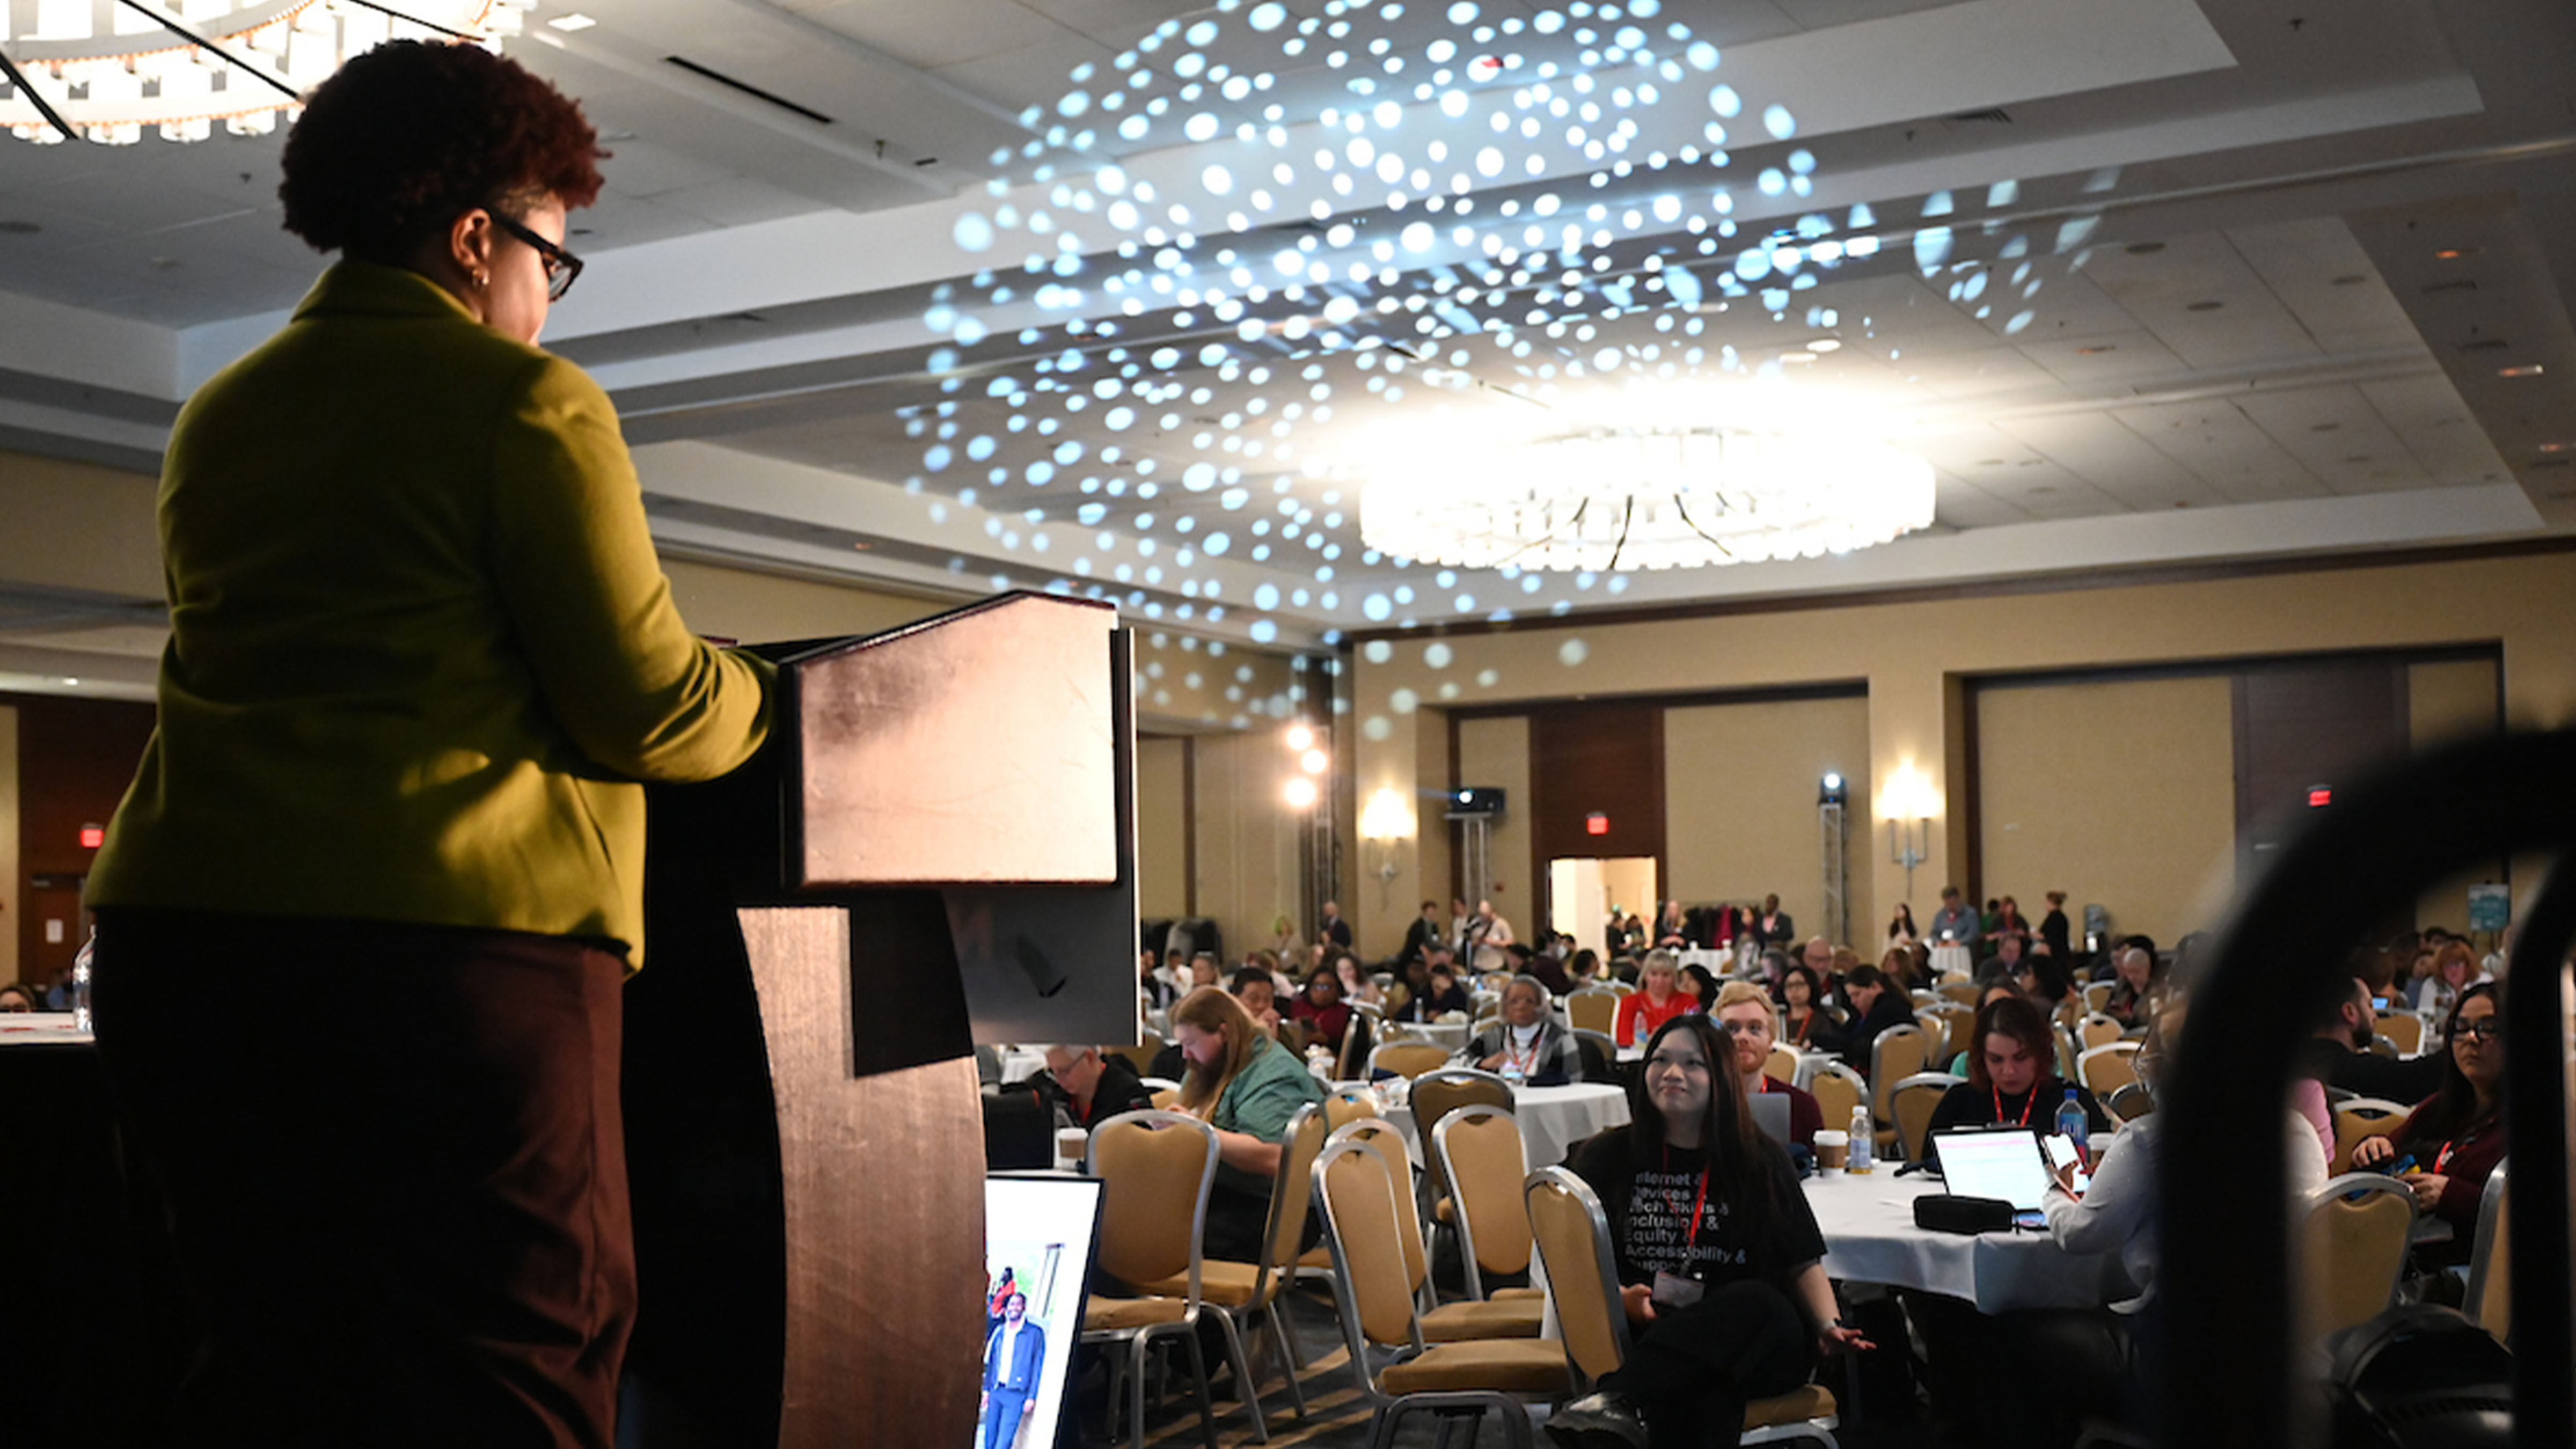 The ballroom held space for 1,300 attendees from across the country with a shared vision of digital inclusion.